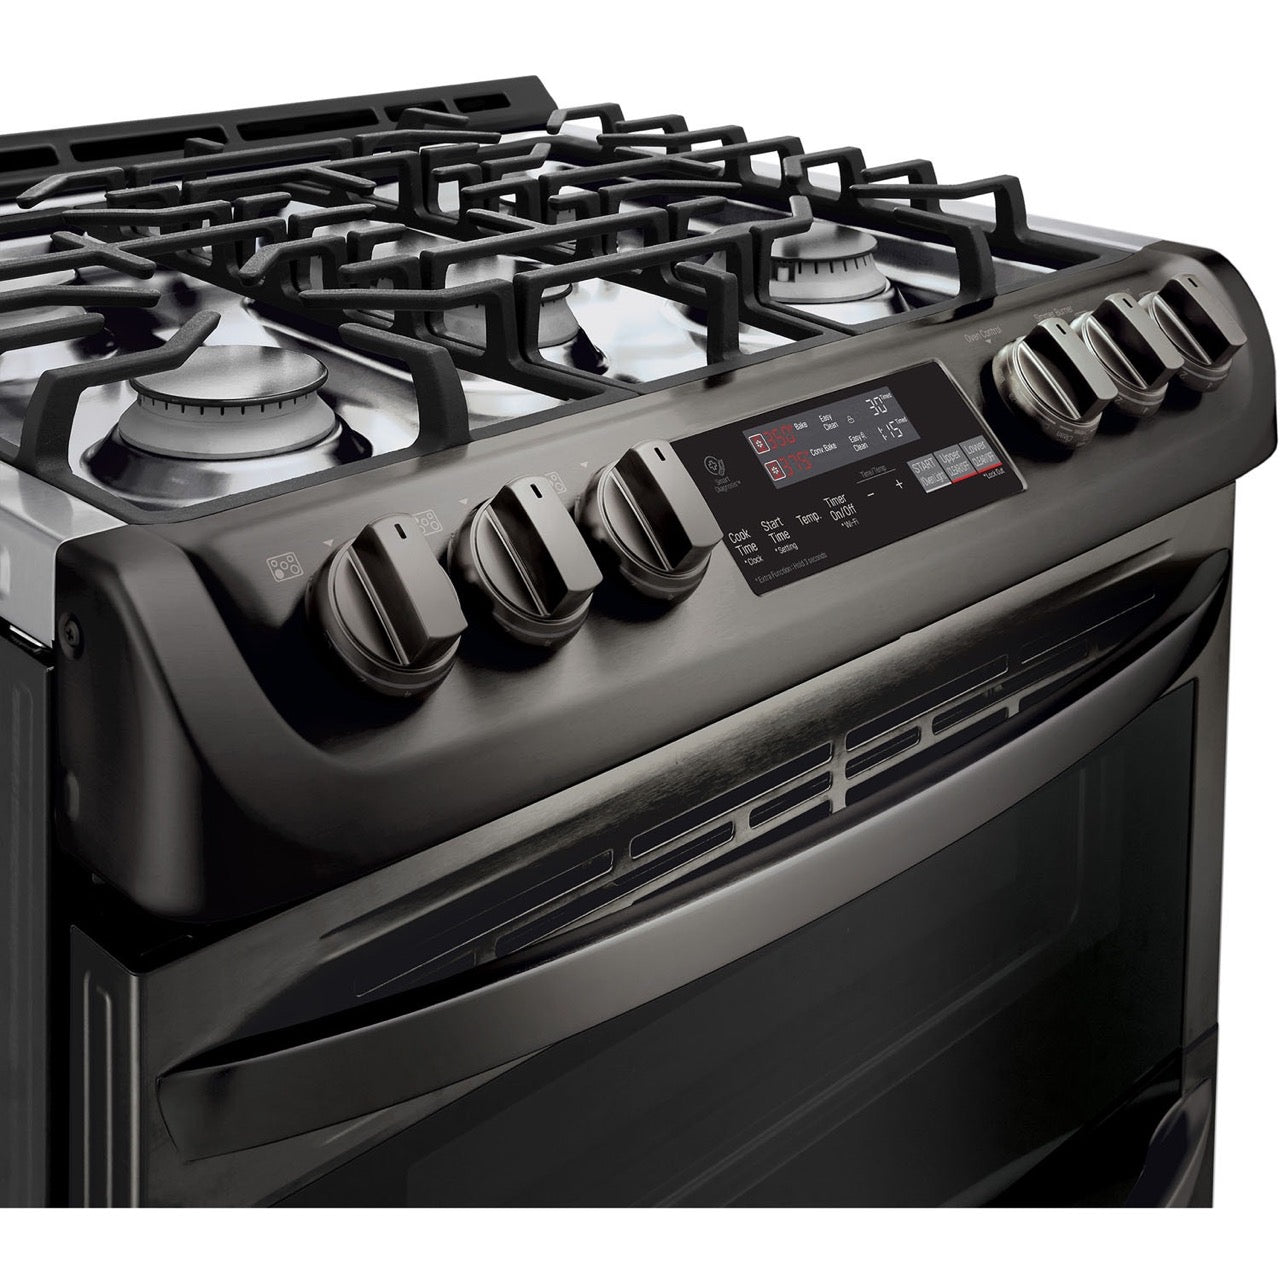 LG Electronics 6.9-Cu. Ft. Gas Range with Double Oven and ProBake Convection, Black Stainless Steel (LTG4715BD)